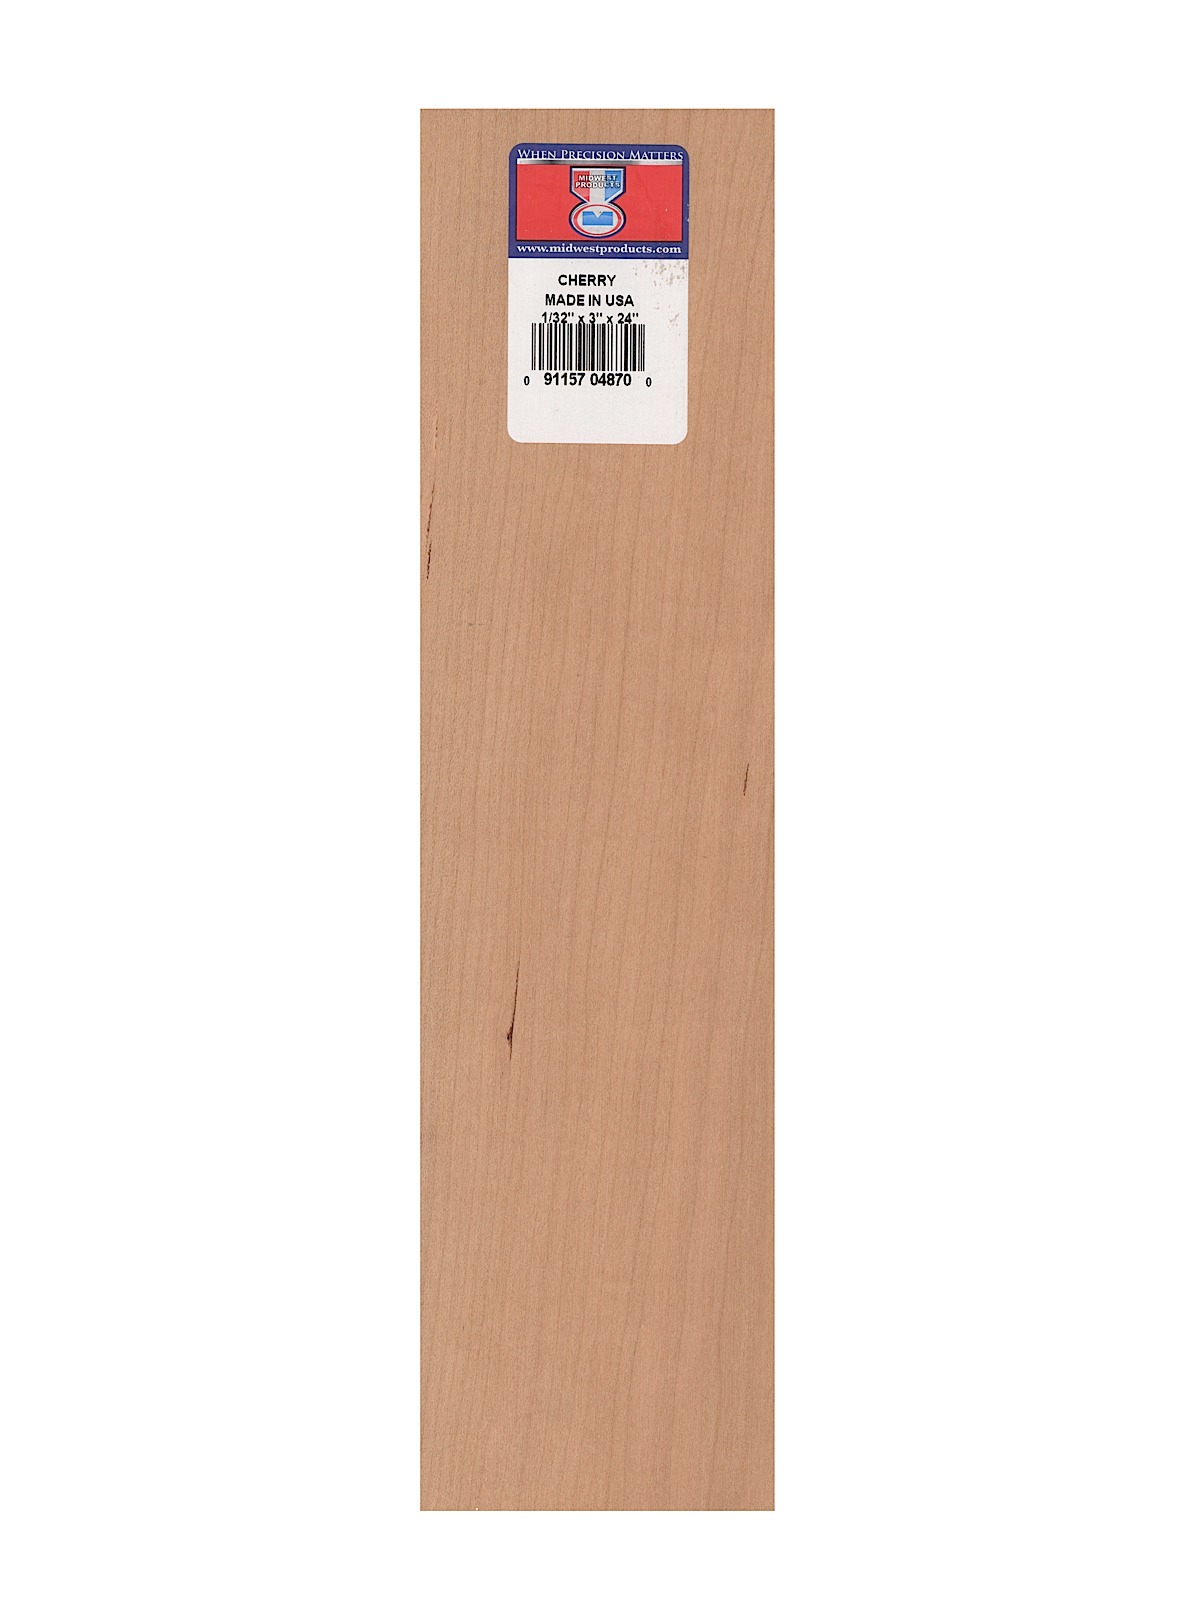 Cherry Project Woods 1 32 In. X 3 In. X 24 In. Sheet